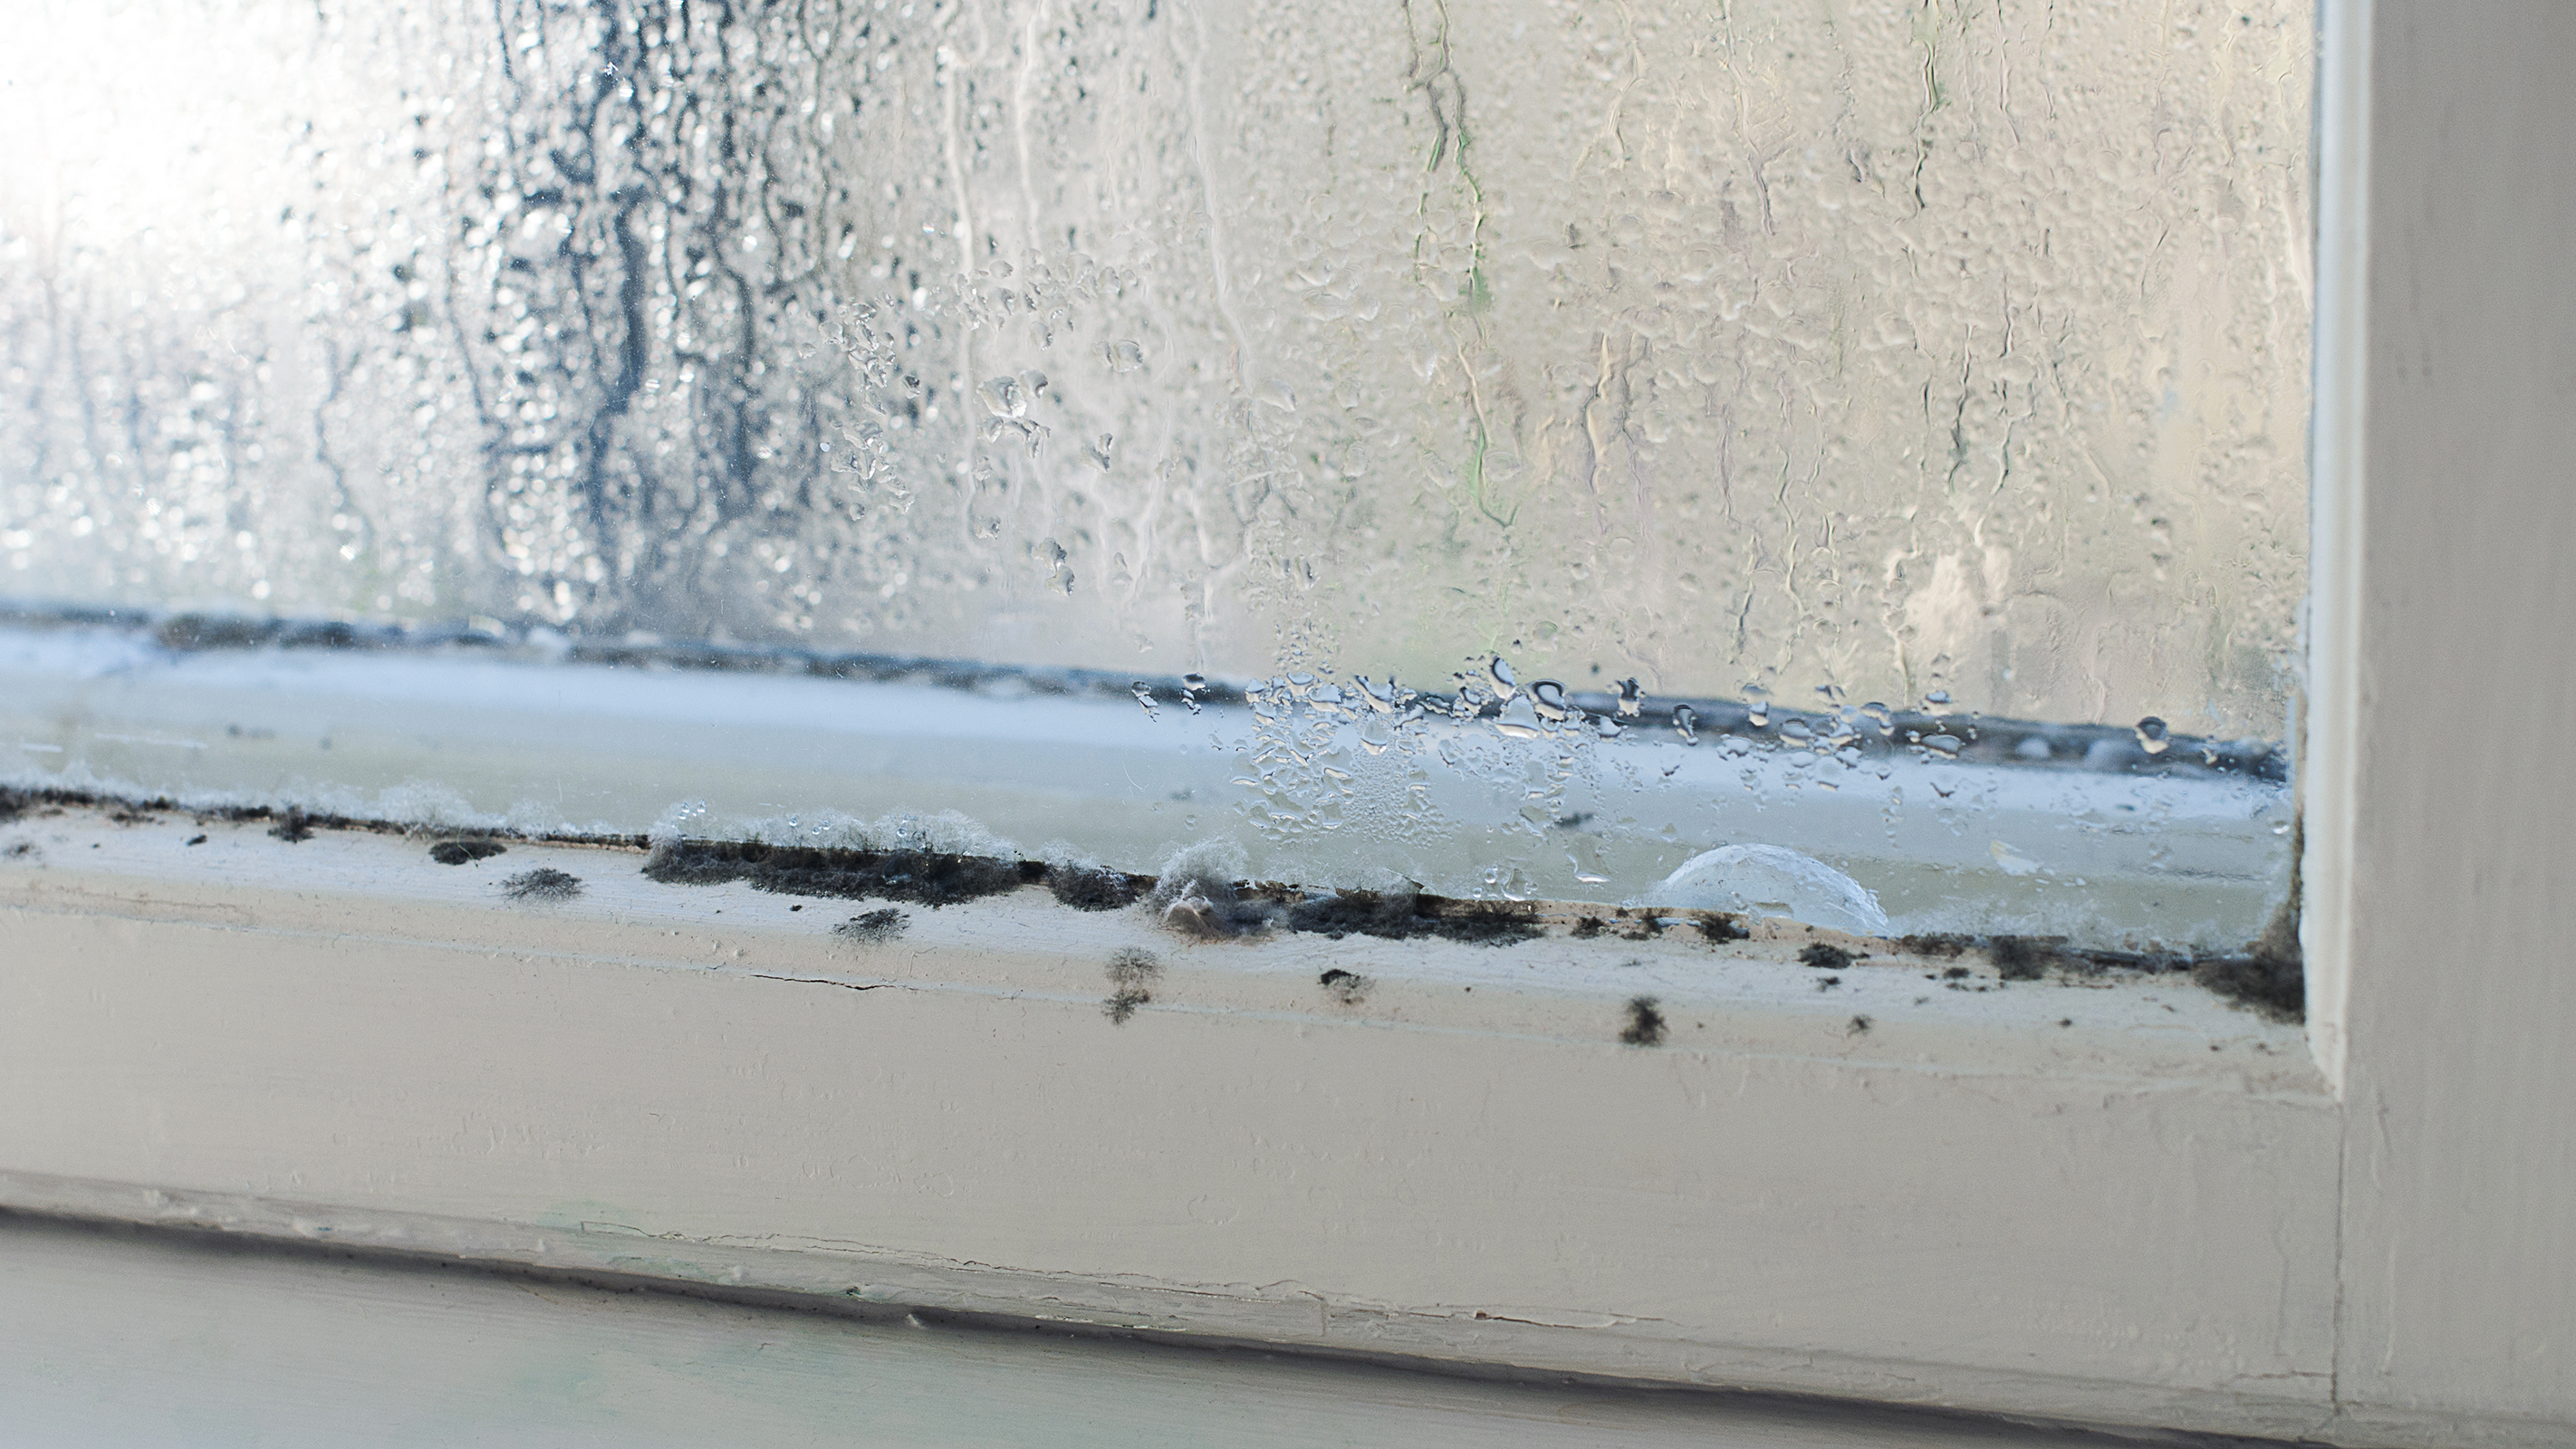 Stop window condensation and pools of water in the morning : r/howto